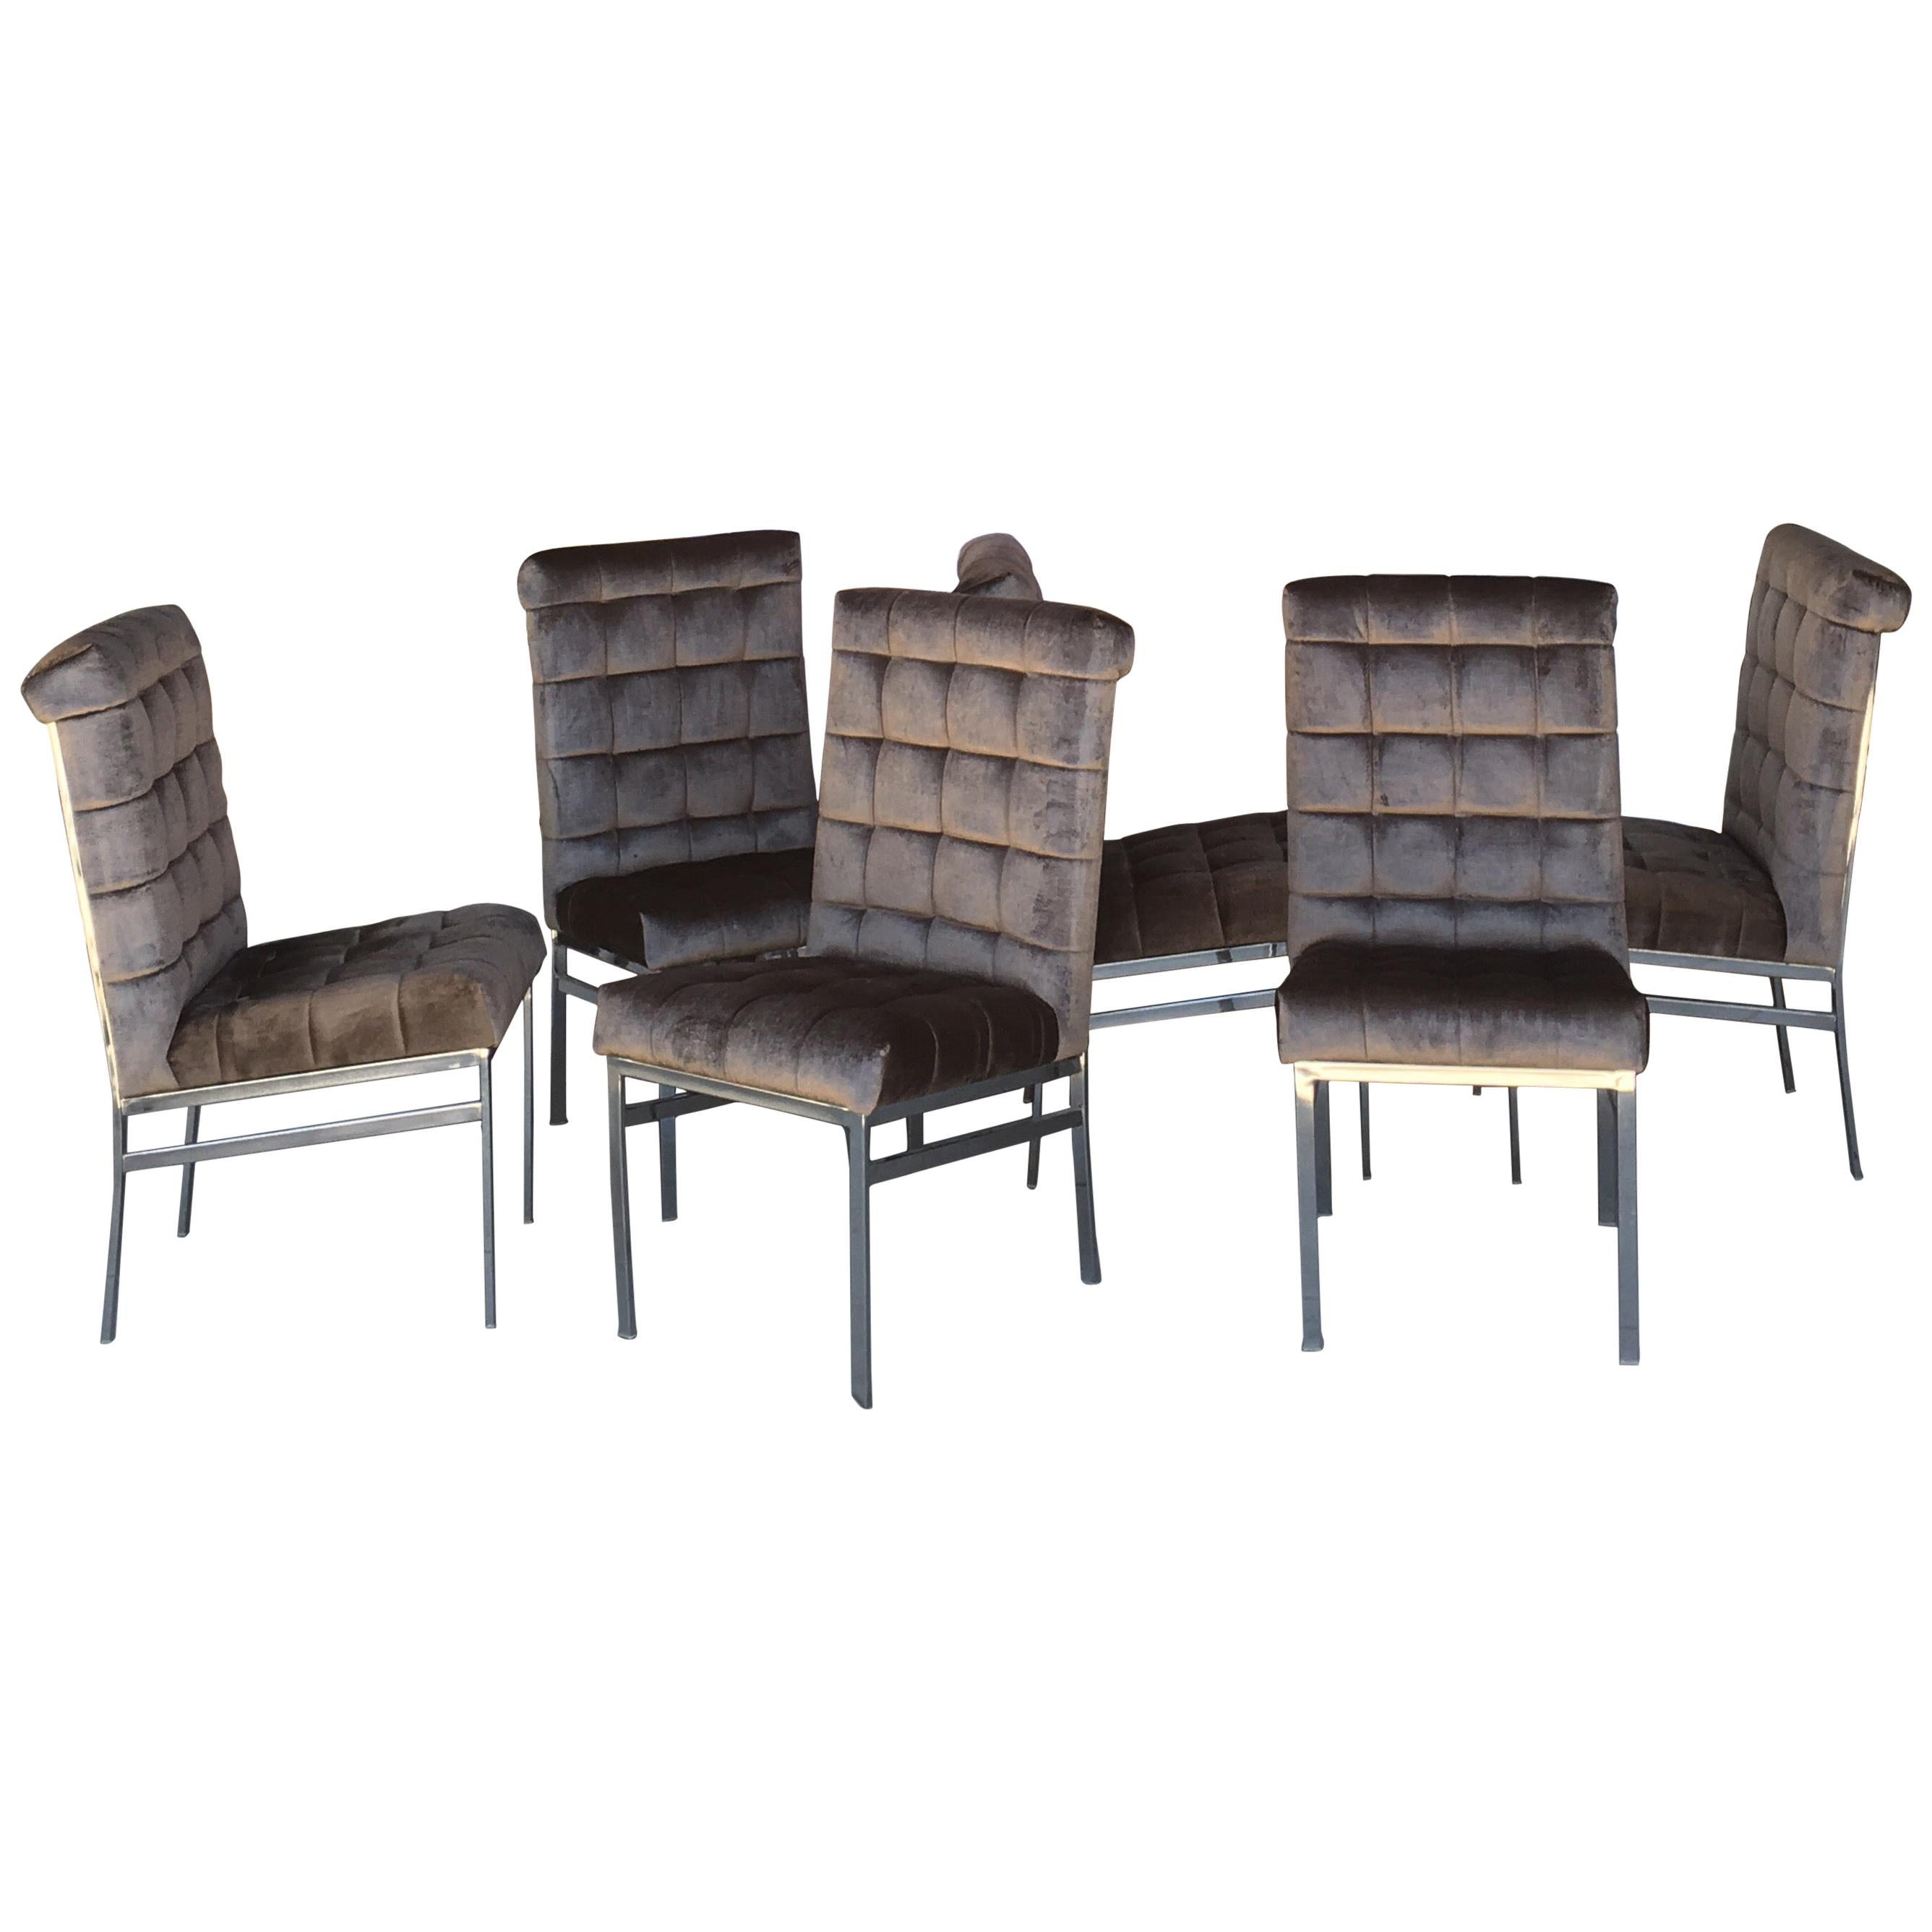 Set of 6 Tufted Pierre Cardin Dining Chairs in New Mink Color Velvet